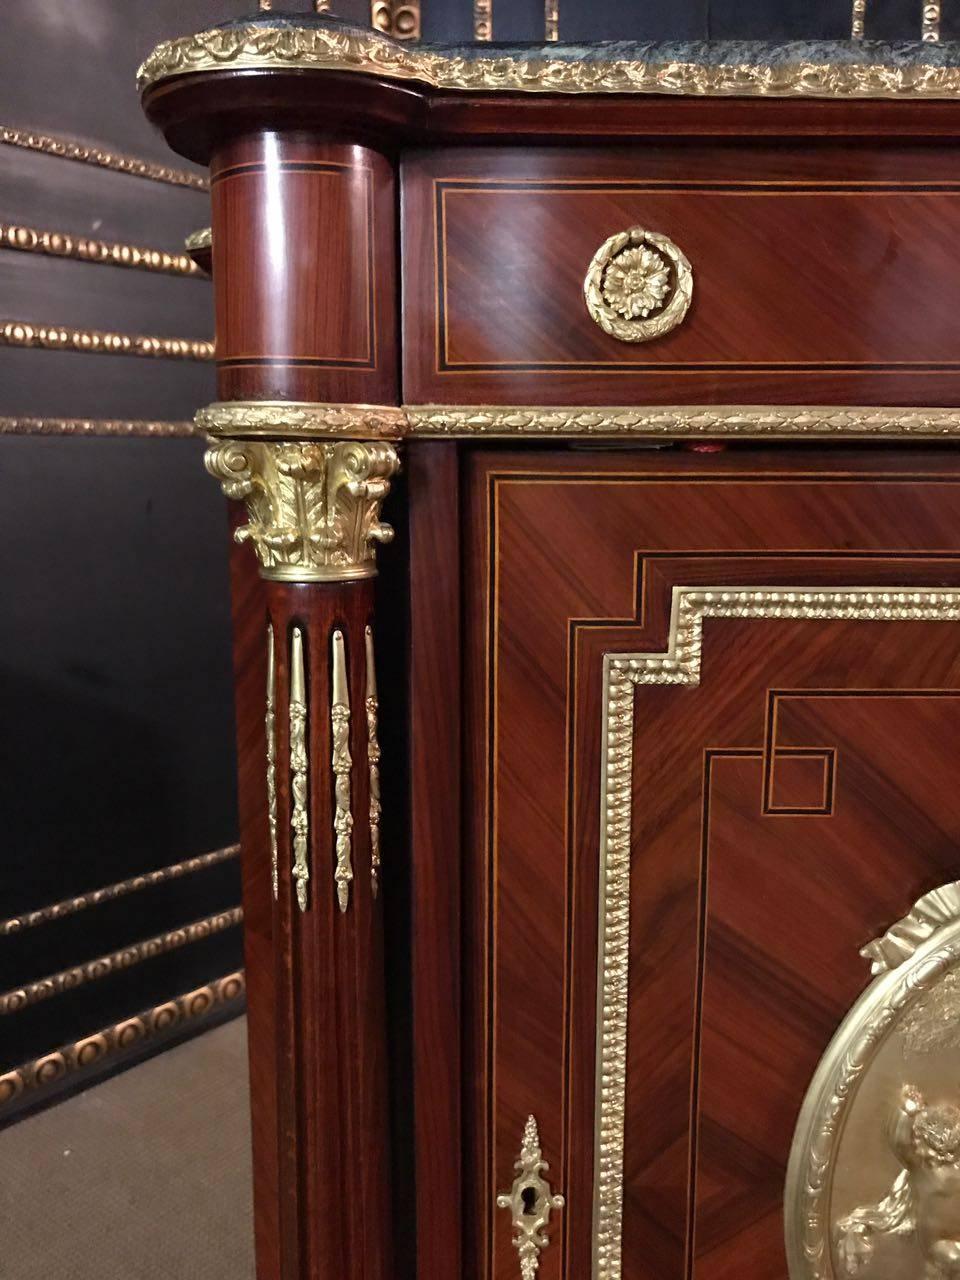 20th Century Meuble De Appui Cabinet in the Louis XV Style